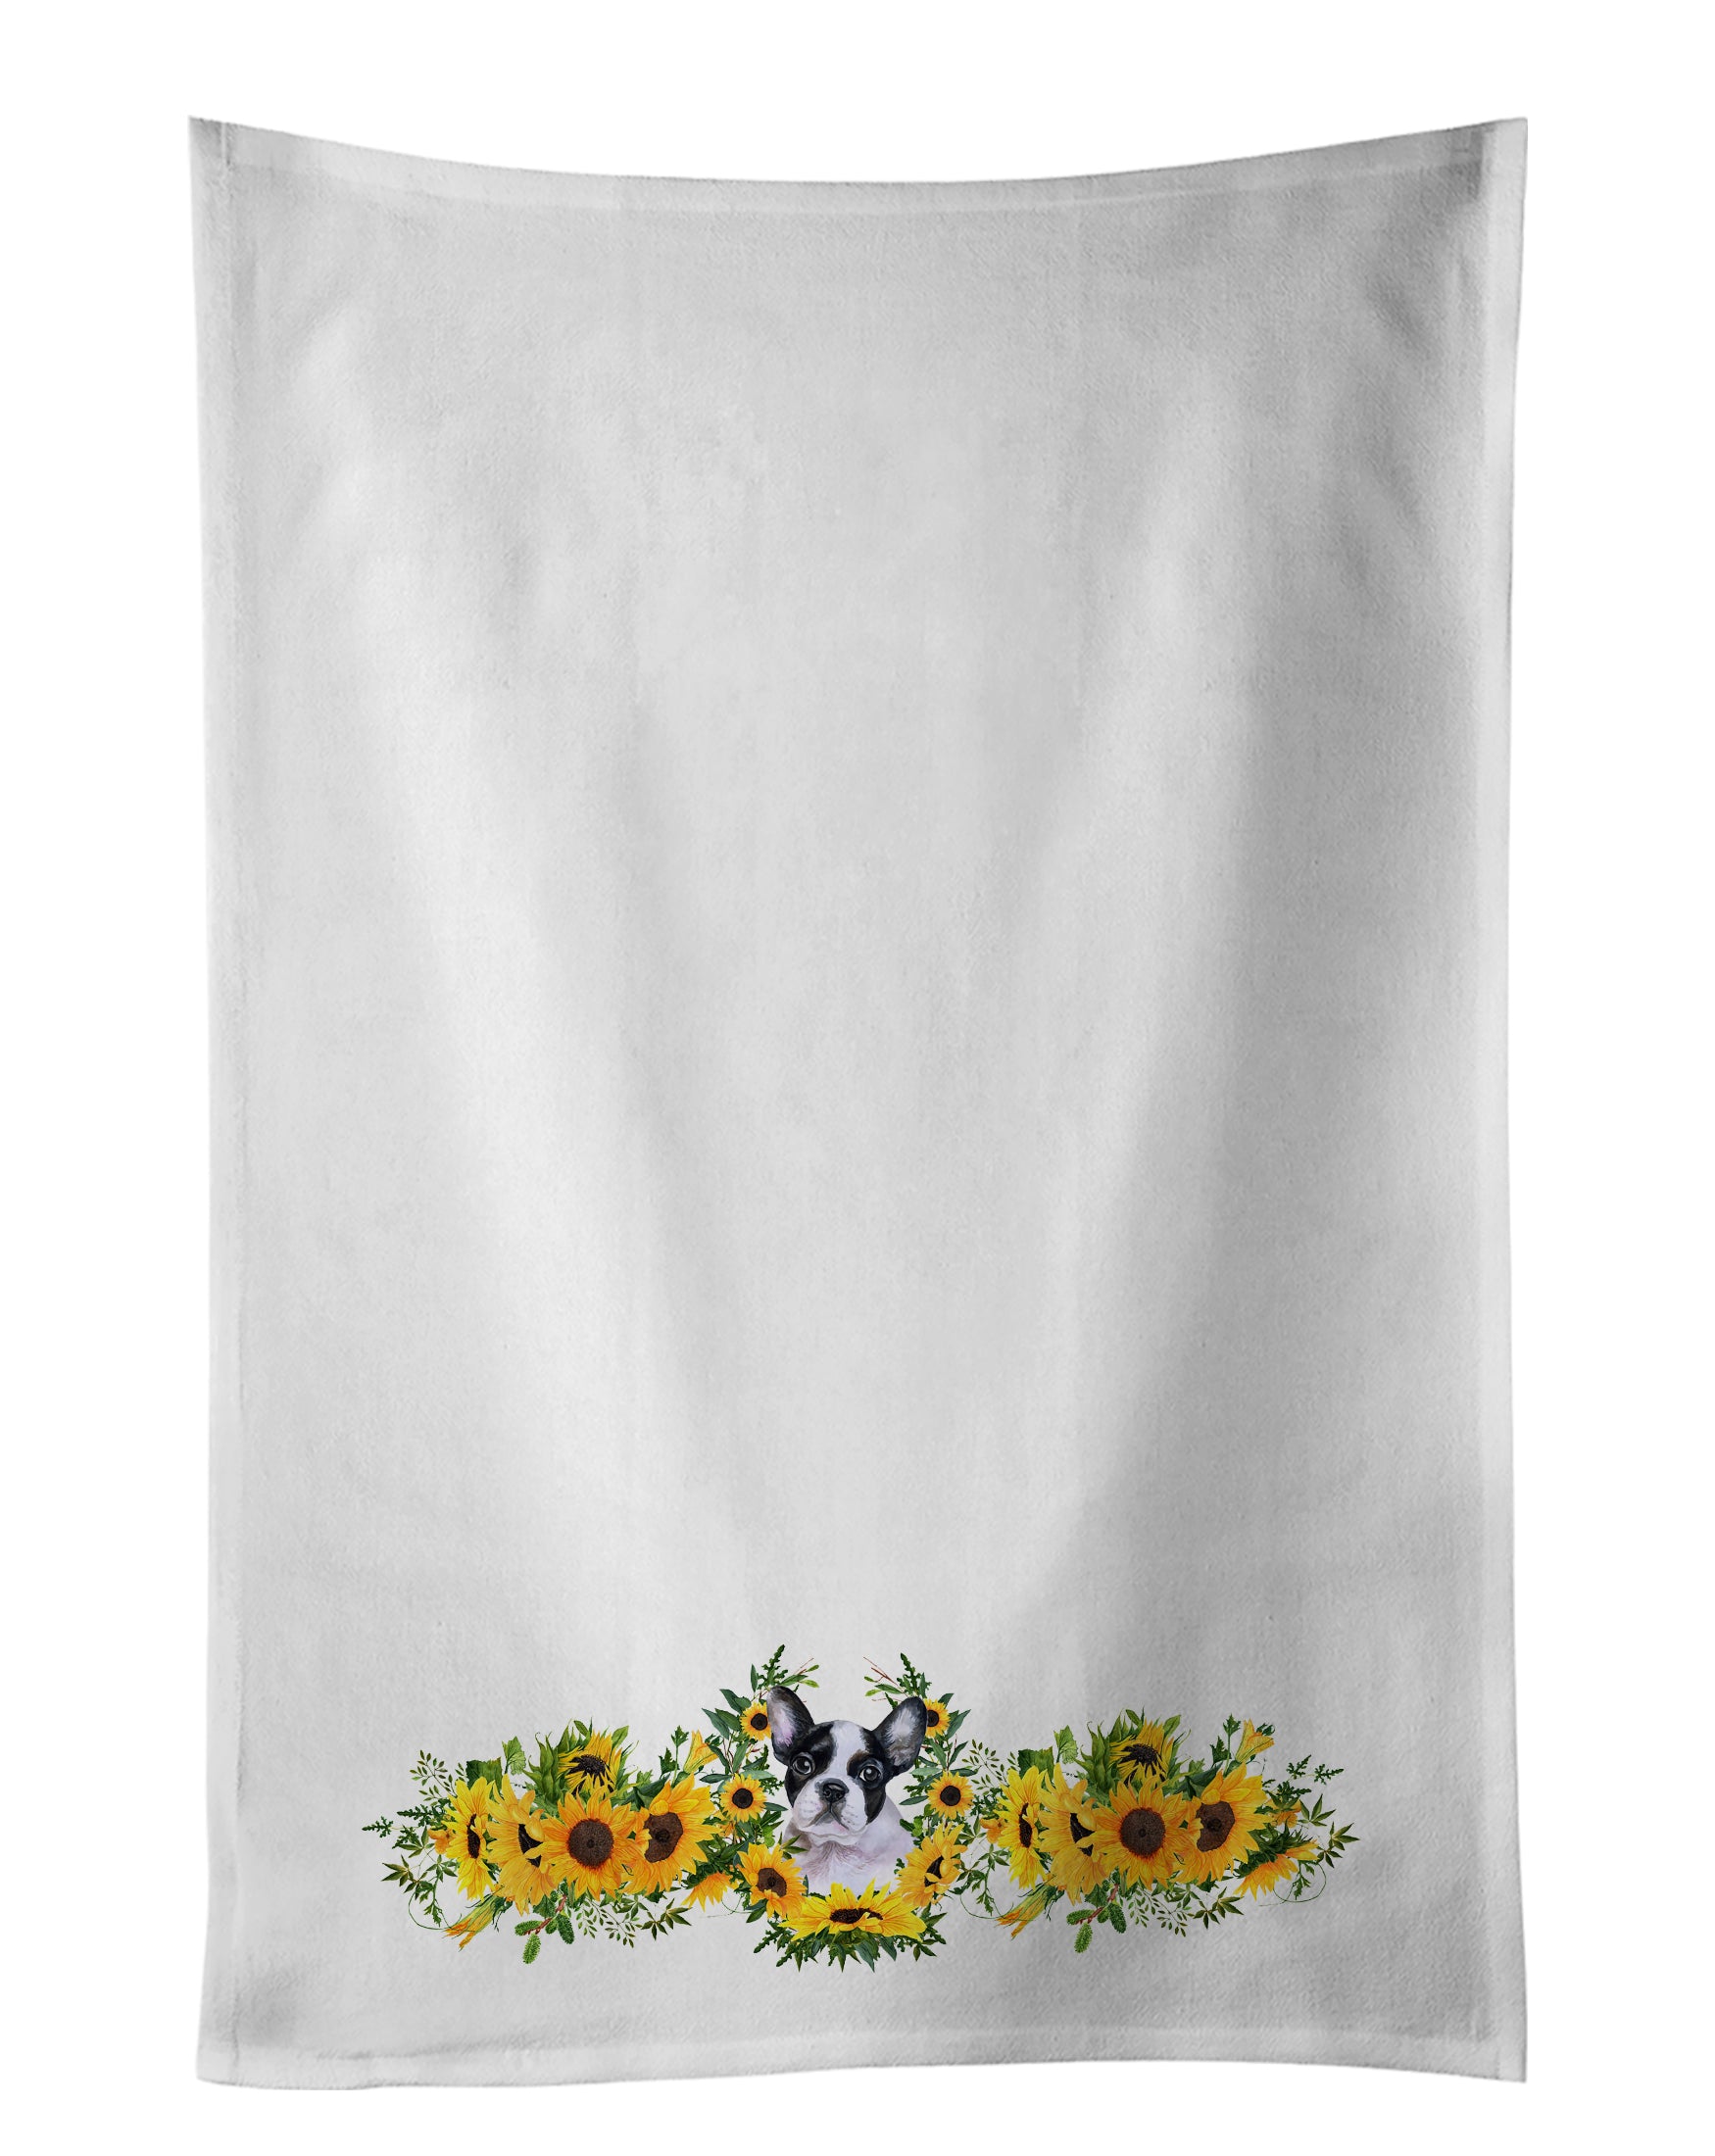 Buy this French Bulldog Black White in Sunflowers White Kitchen Towel Set of 2